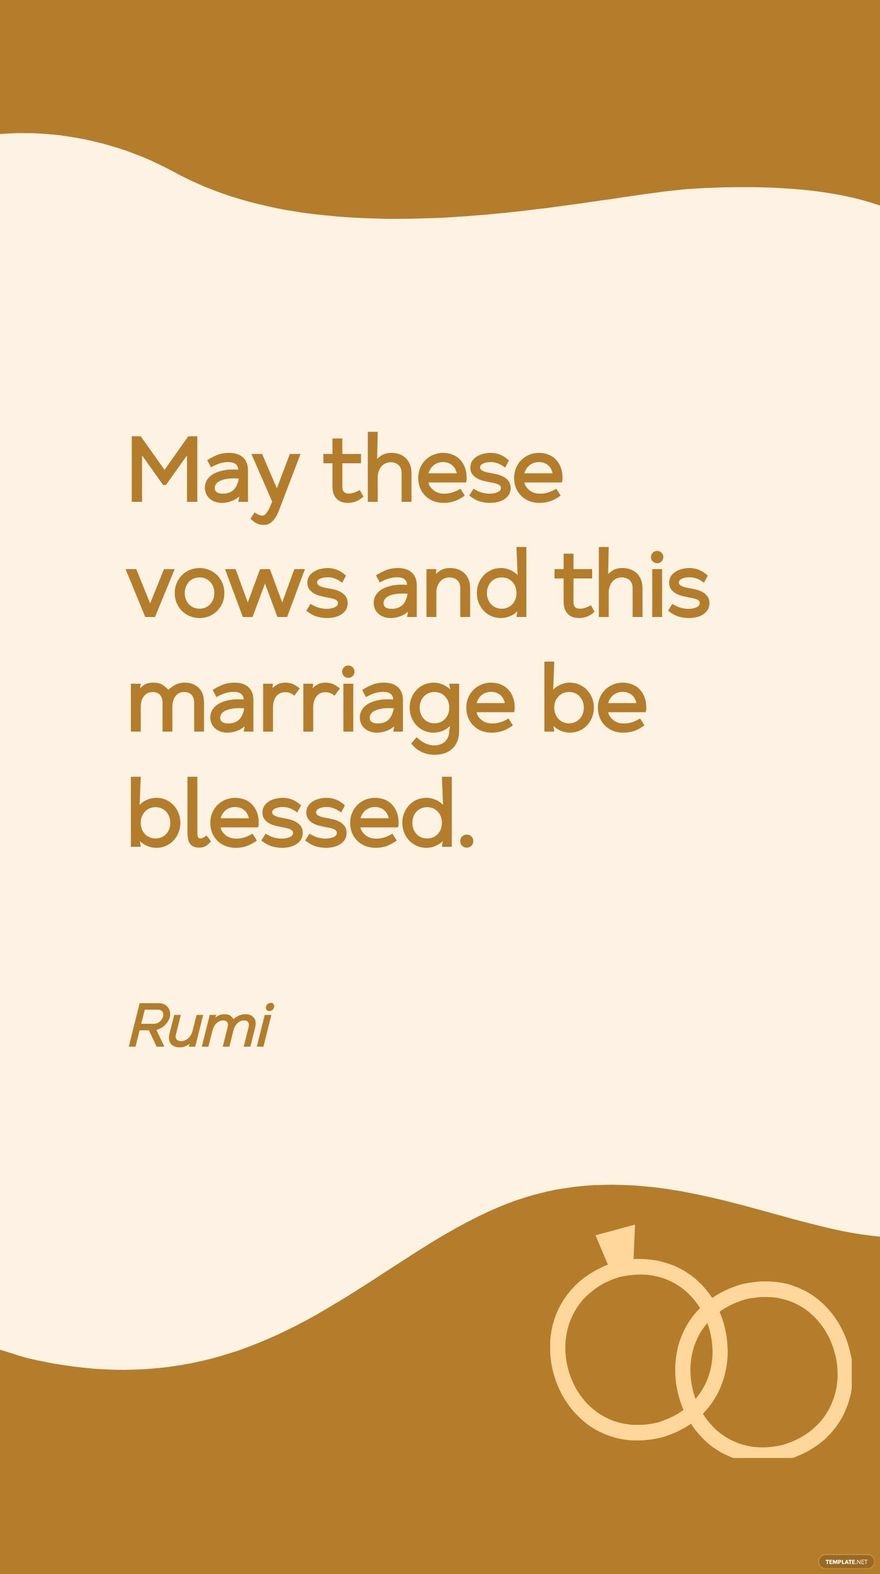 Free Rumi - May these vows and this marriage be blessed.